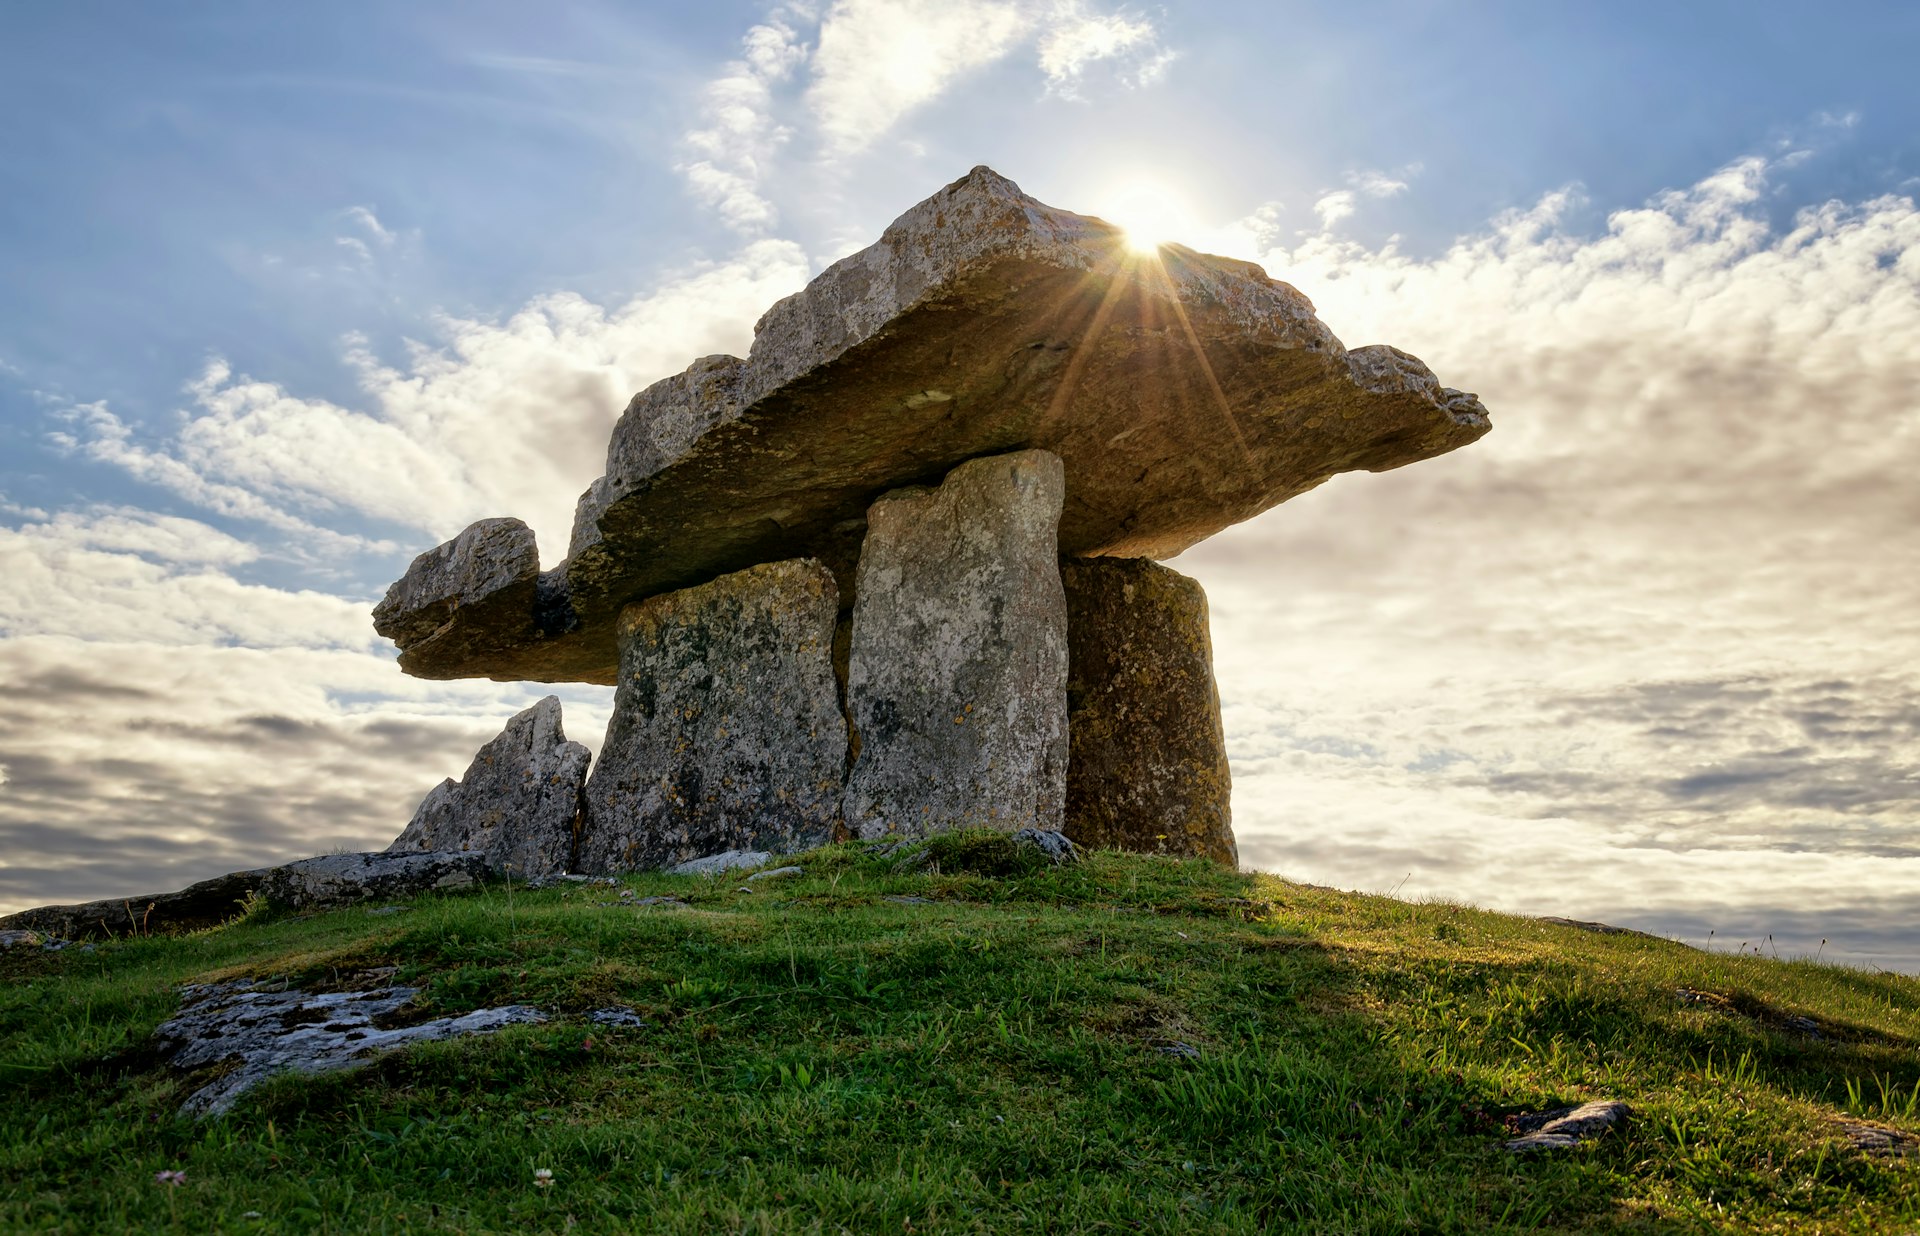 500px Photo ID: 123567043 - Portal tomb in the Burren, County Clare, Ireland.